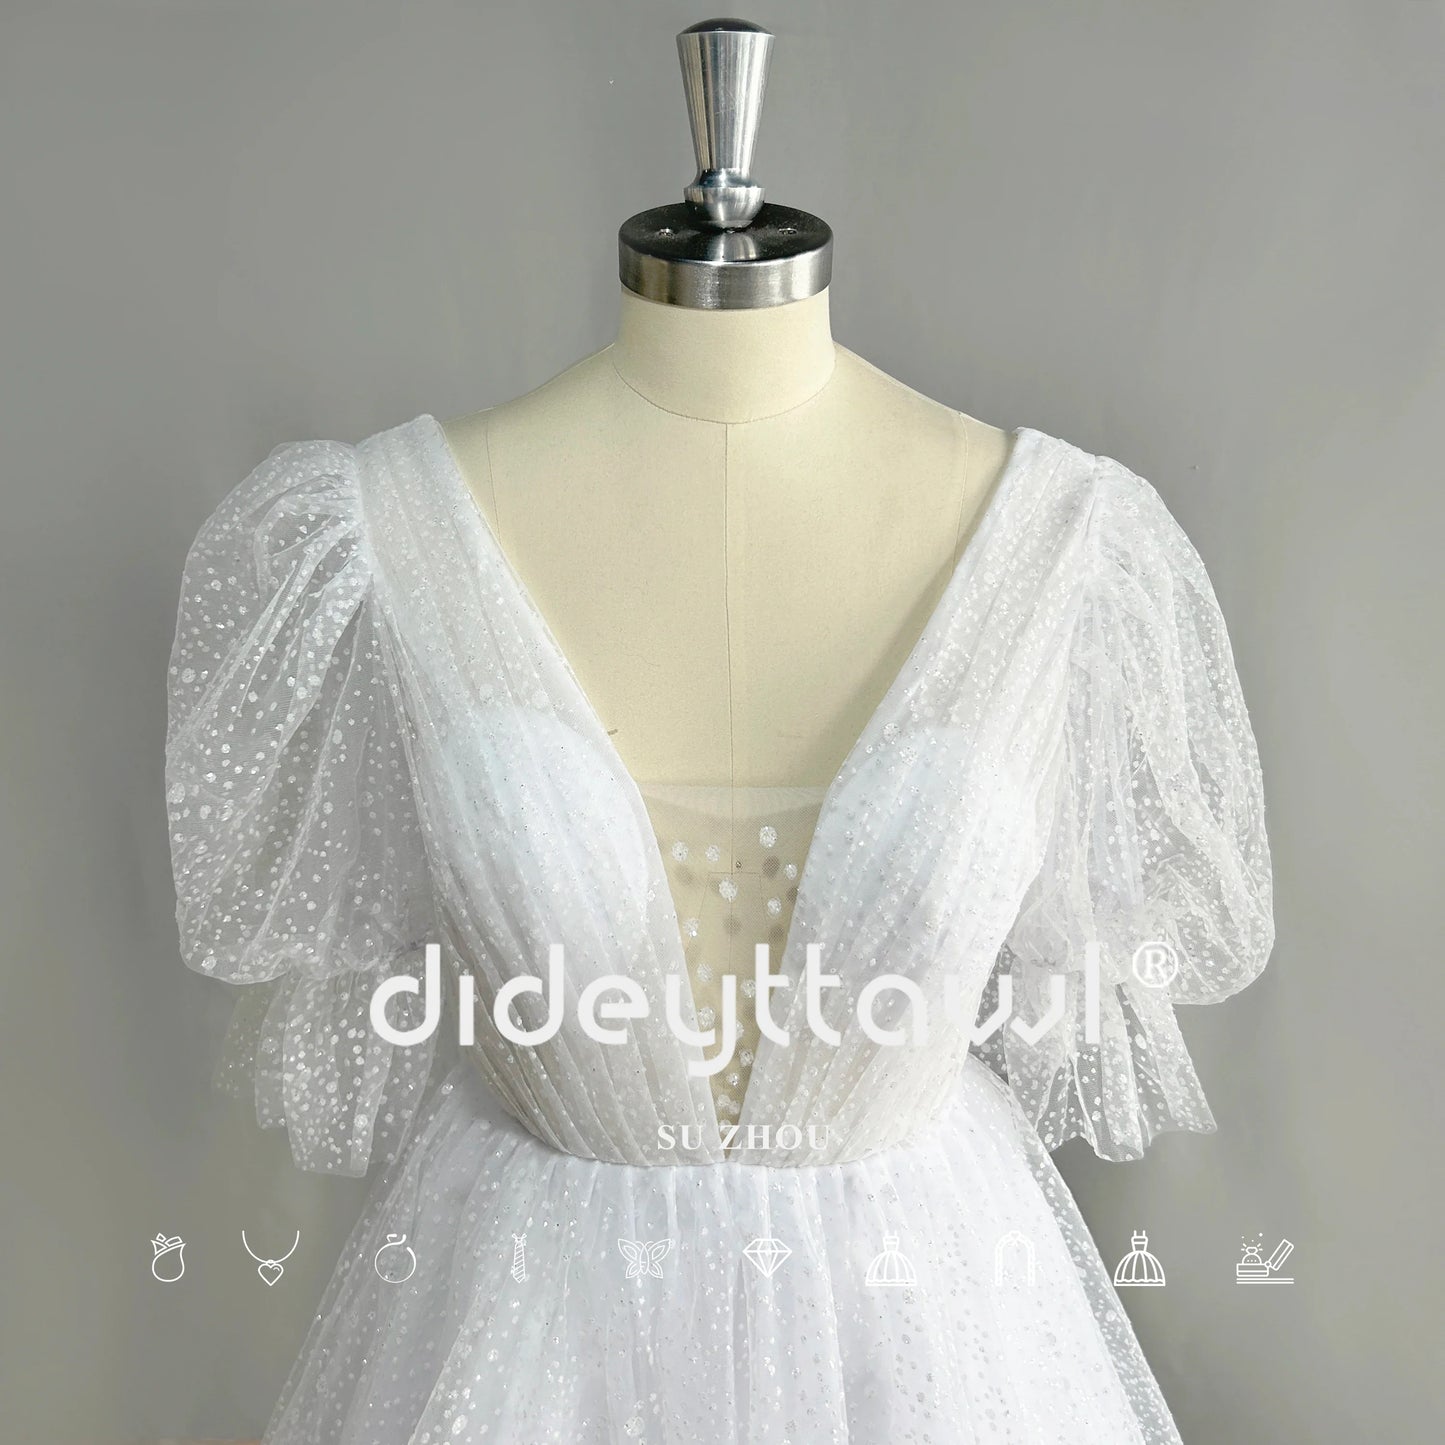 Puff Sleeves Sparkly Tulle Mini Short Wedding Dress V Neck Backless Above Knee Shiny Bridal Gown